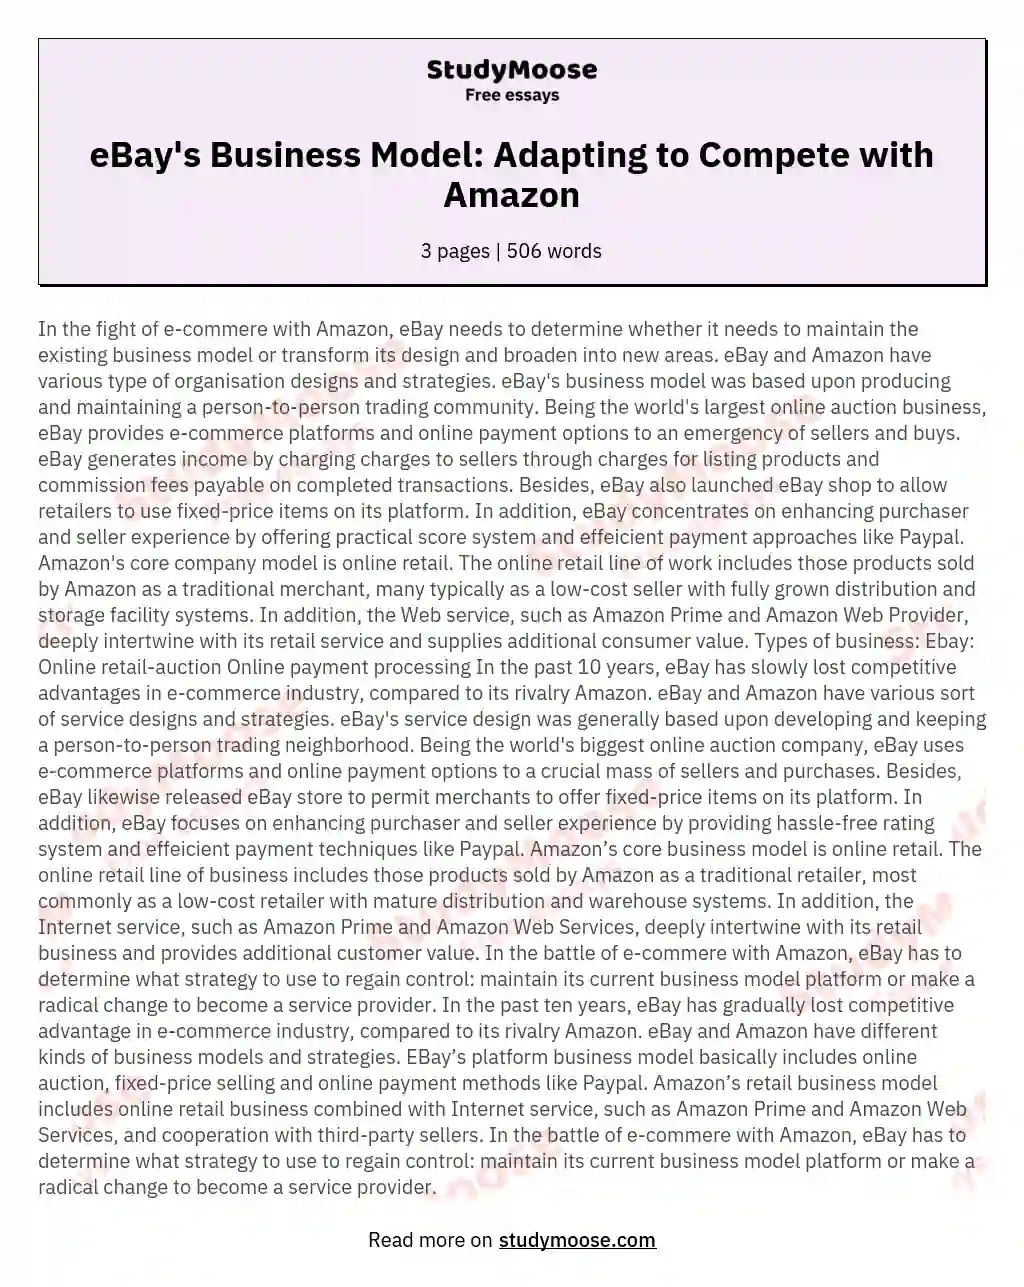 eBay's Business Model: Adapting to Compete with Amazon essay